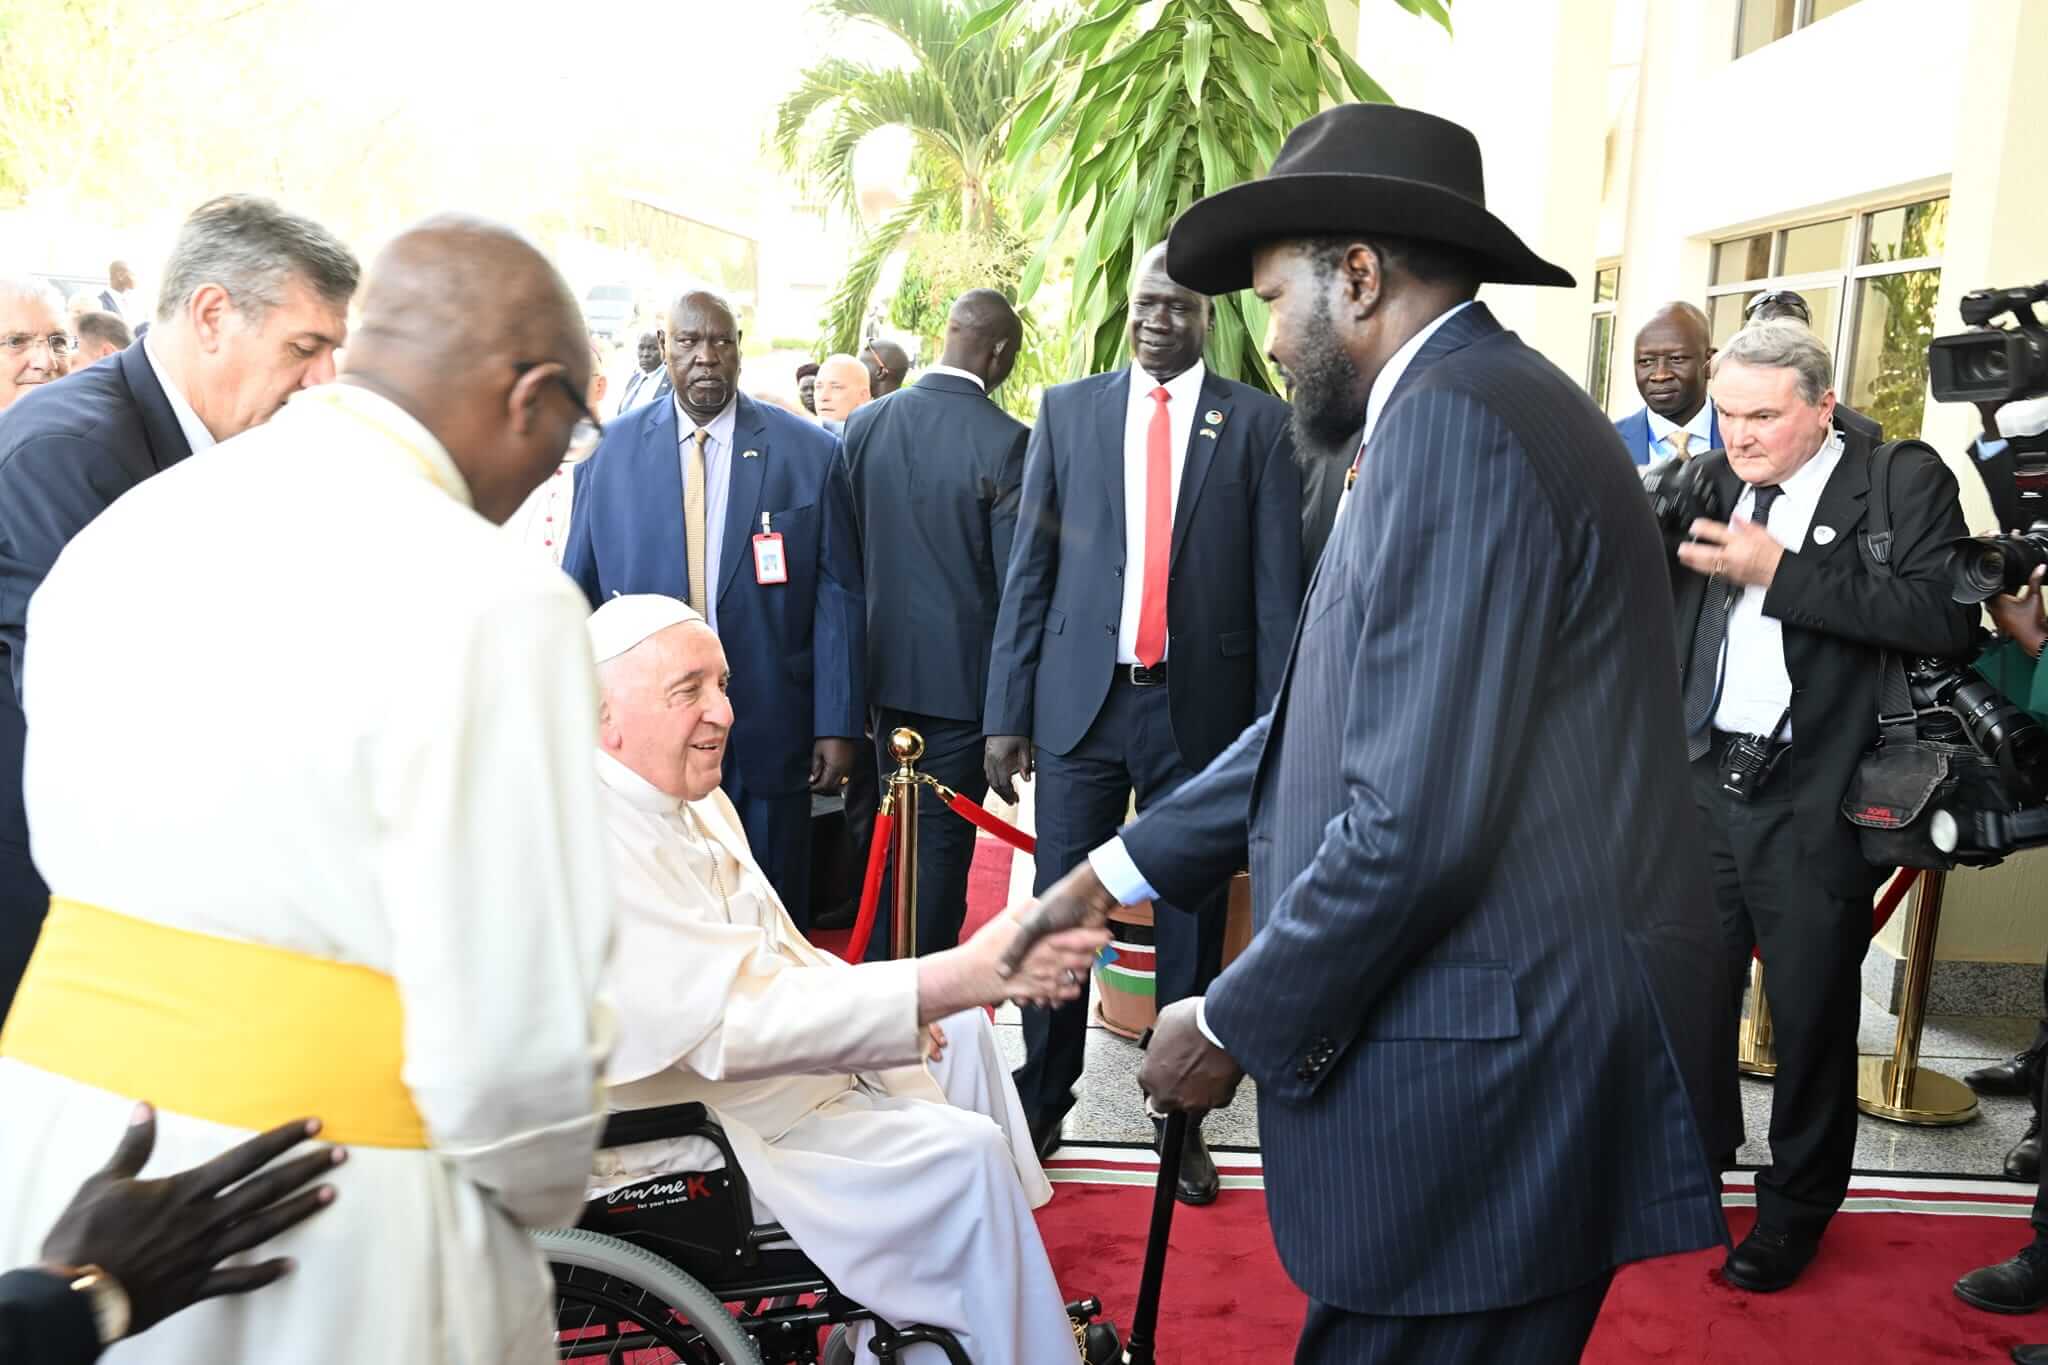 Kiir officially revives Rome talks as Pope Francis makes peace call